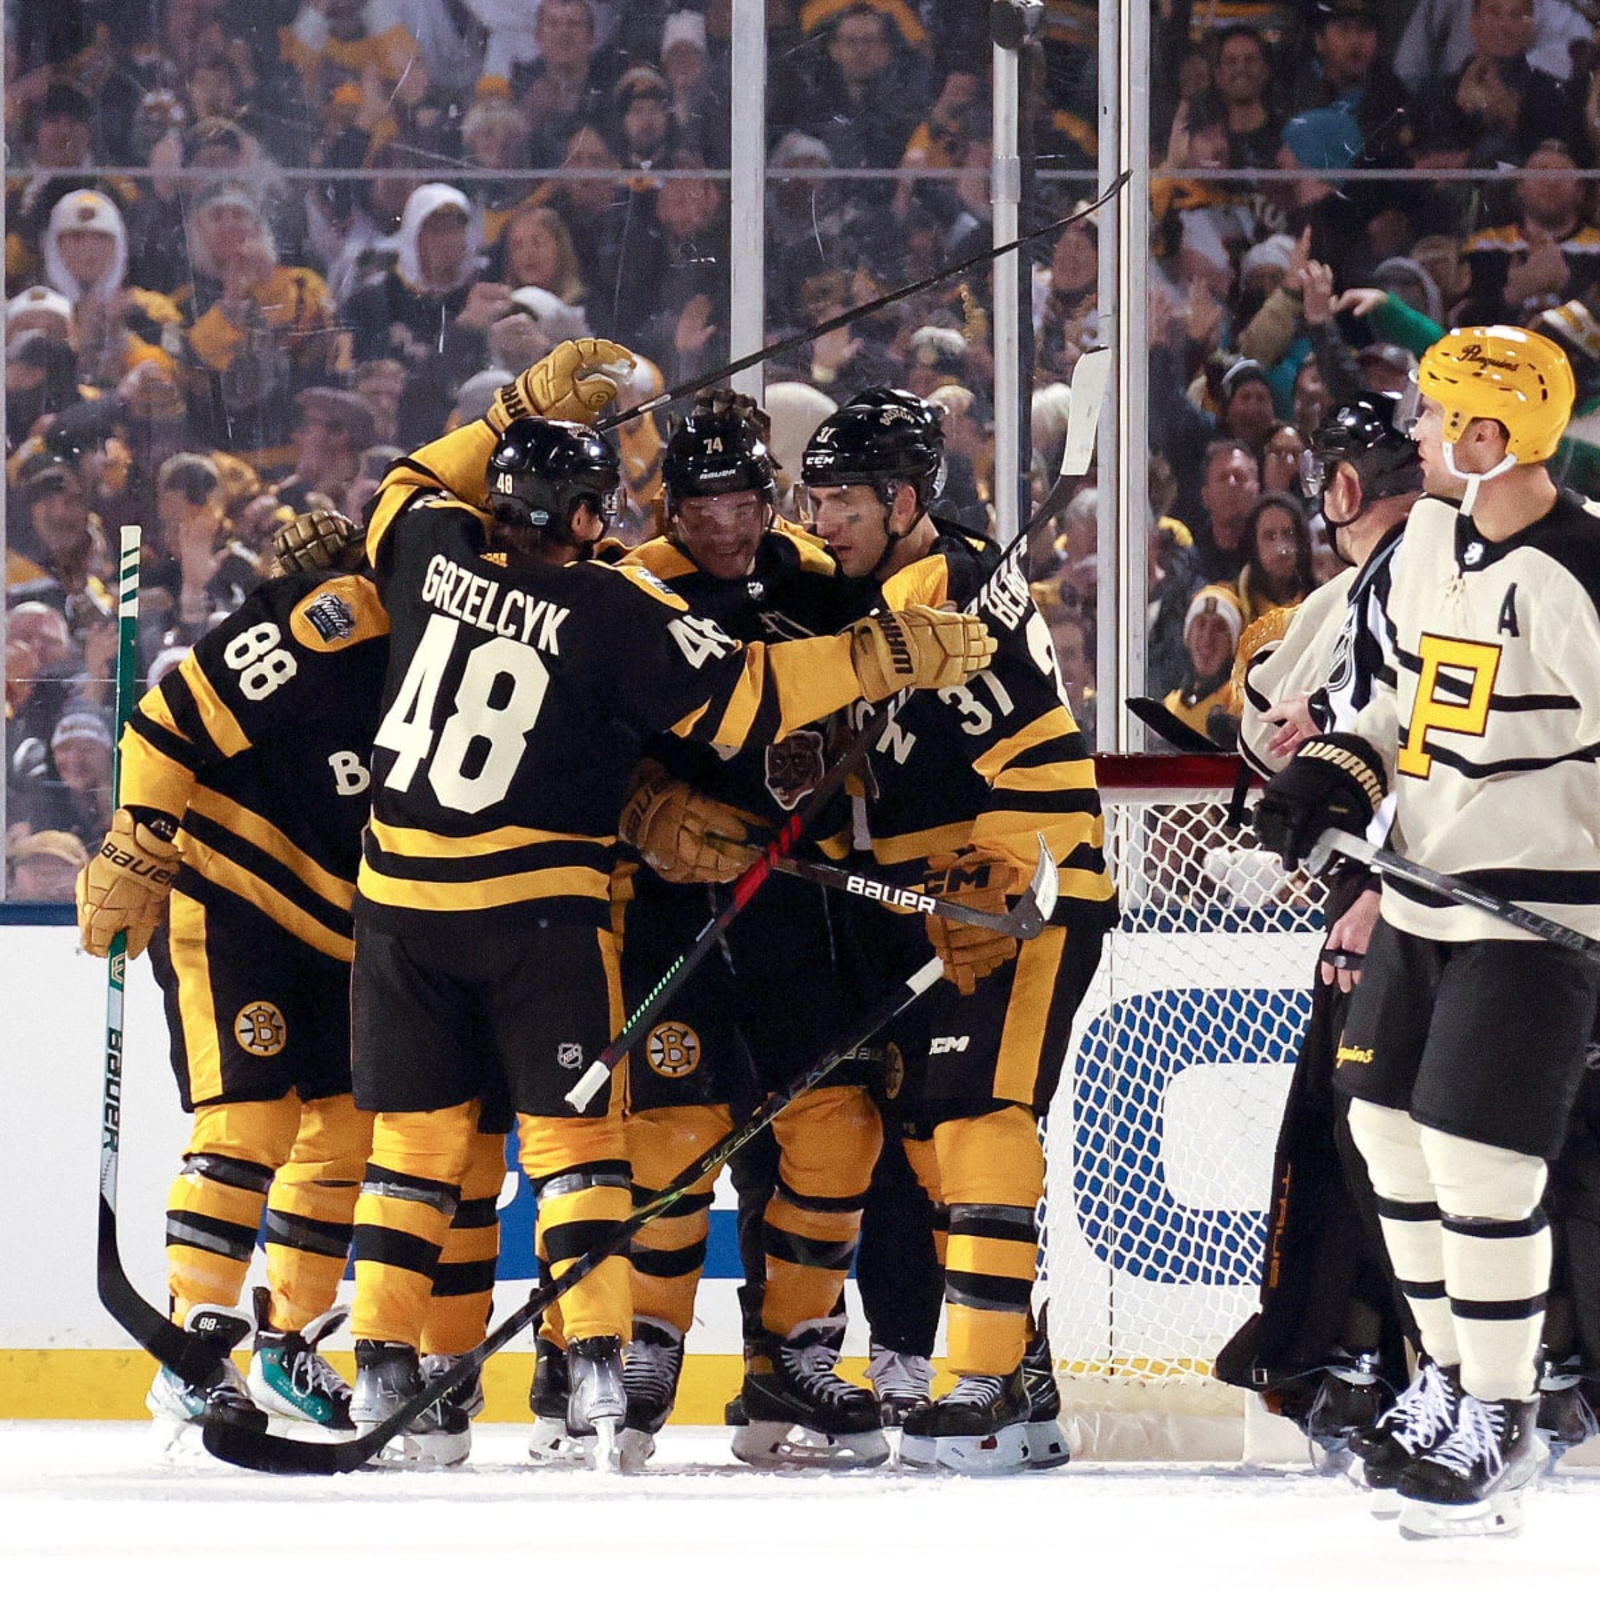 2023 NHL Winter Classic, Already counting down the days., By Boston  Bruins